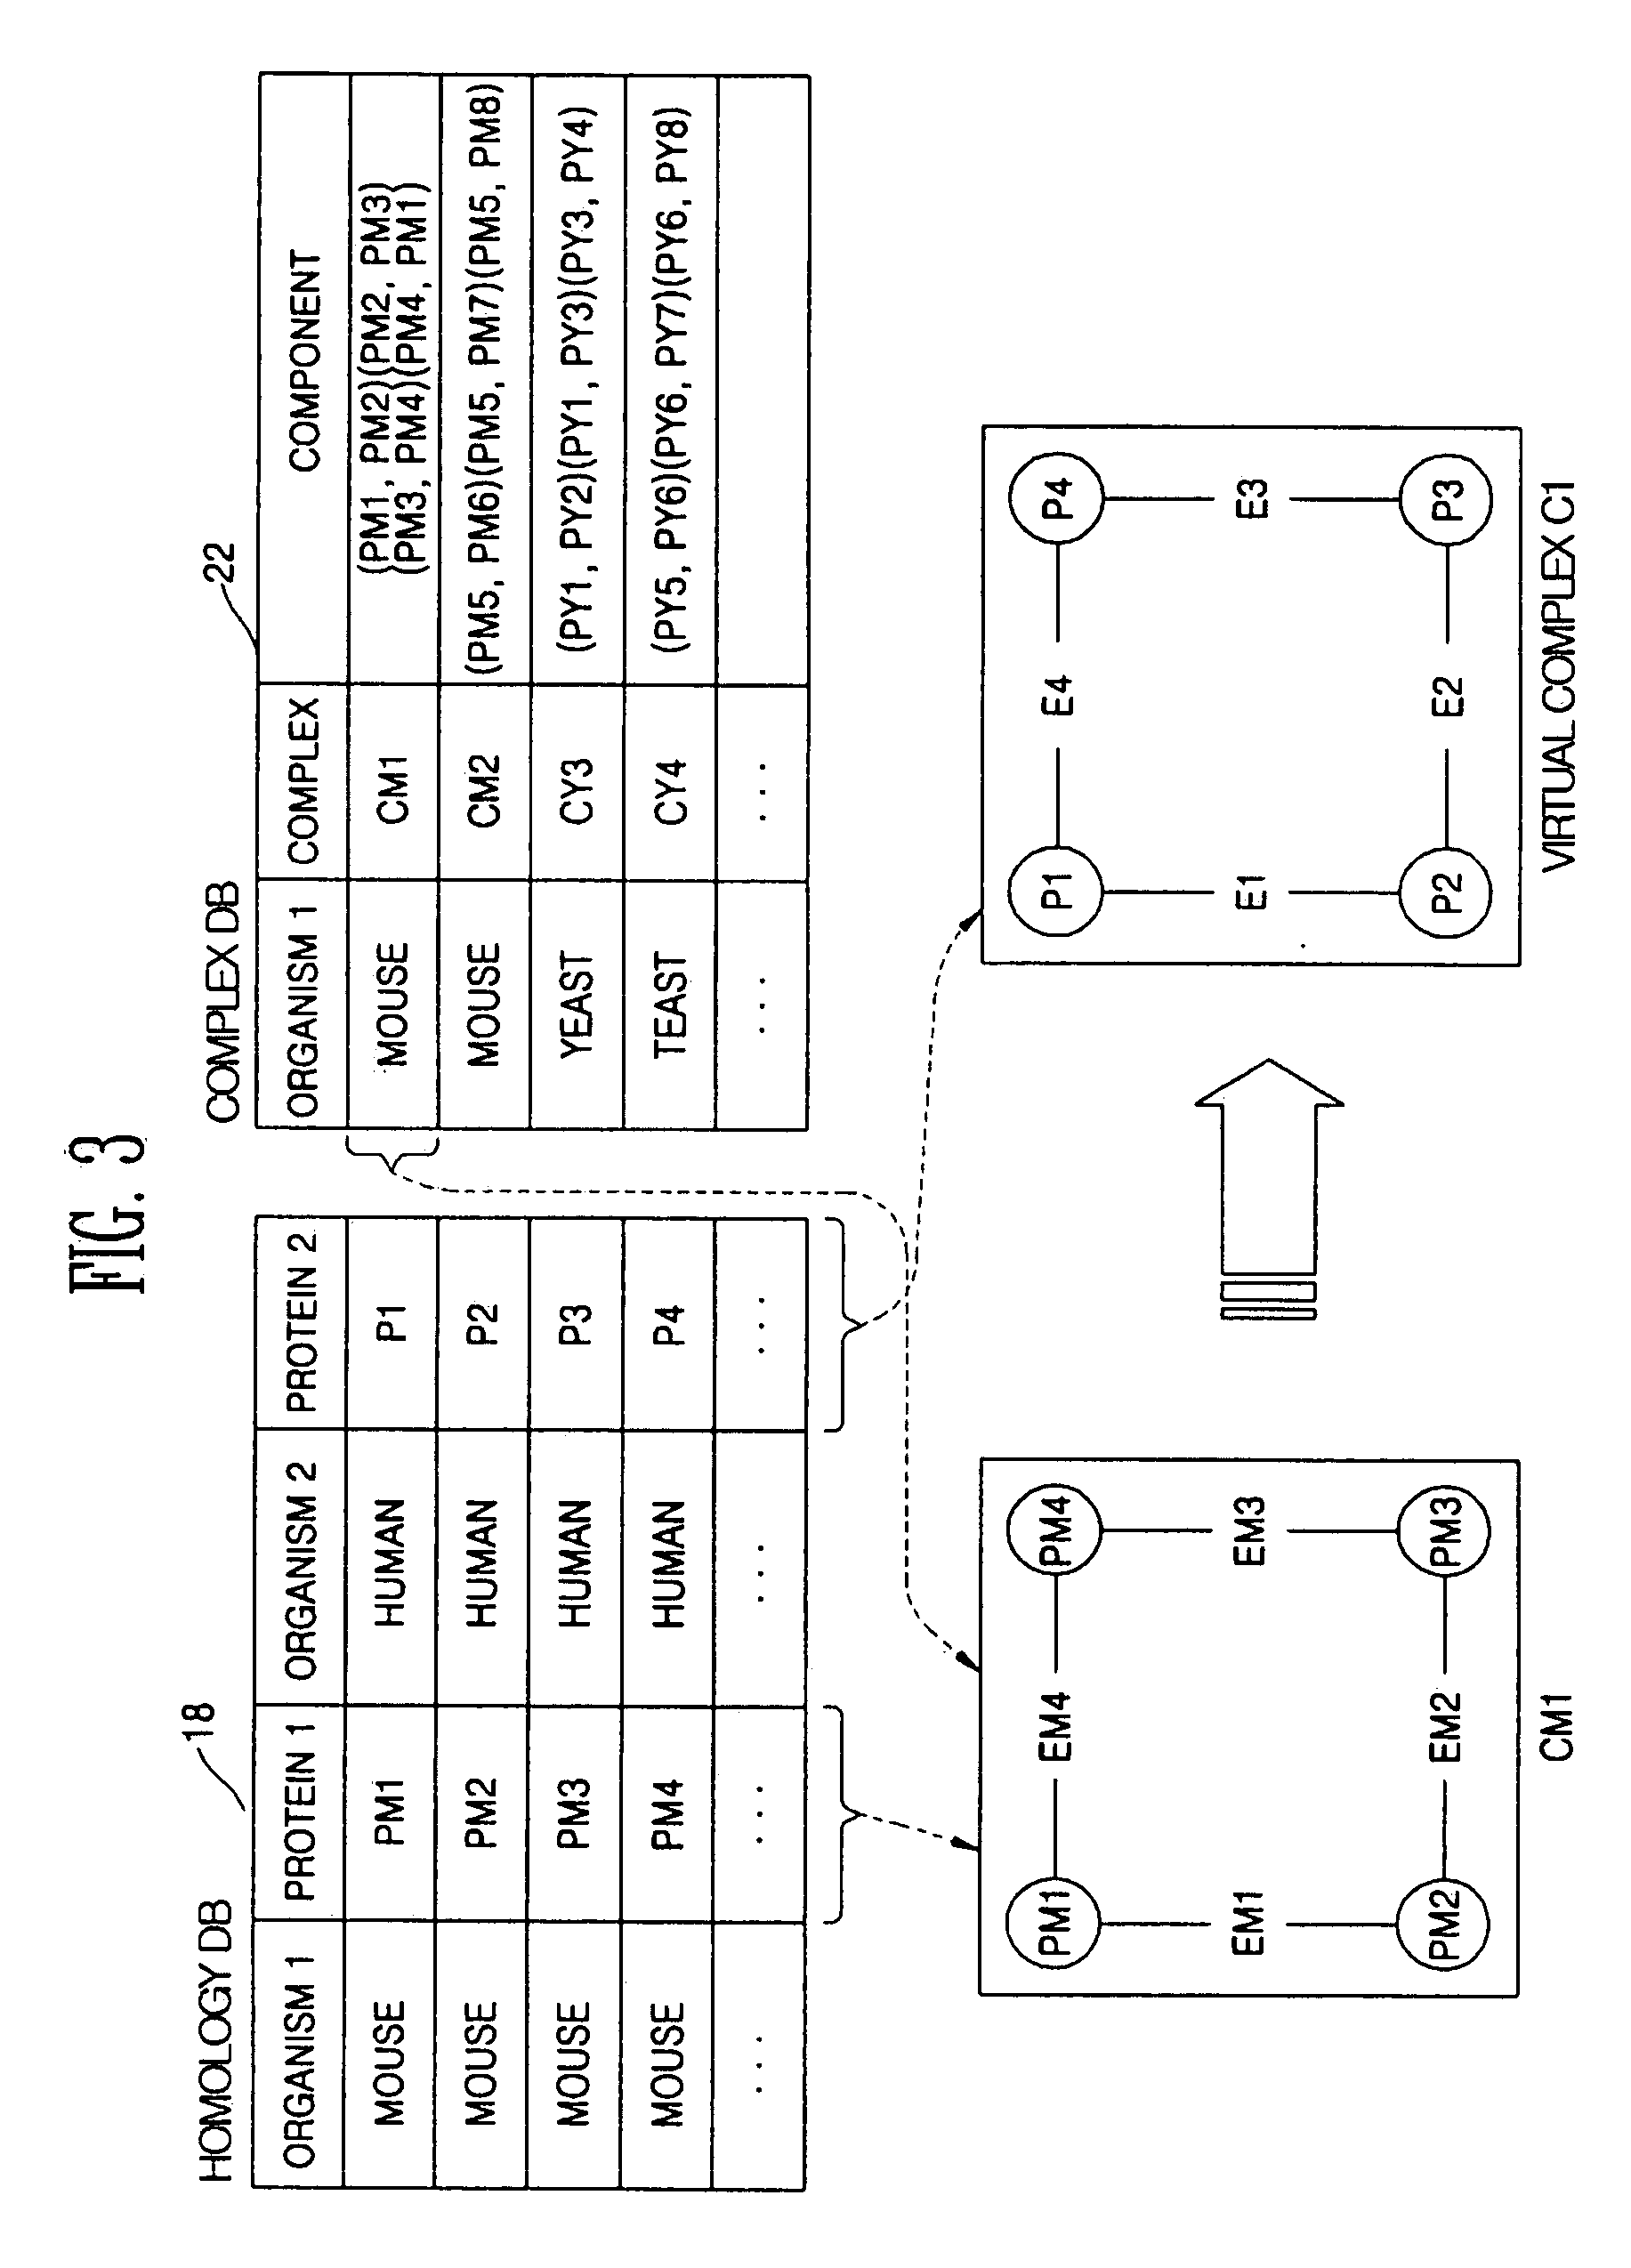 Method and apparatus for homology-based complex detection in a protein-protein interaction network